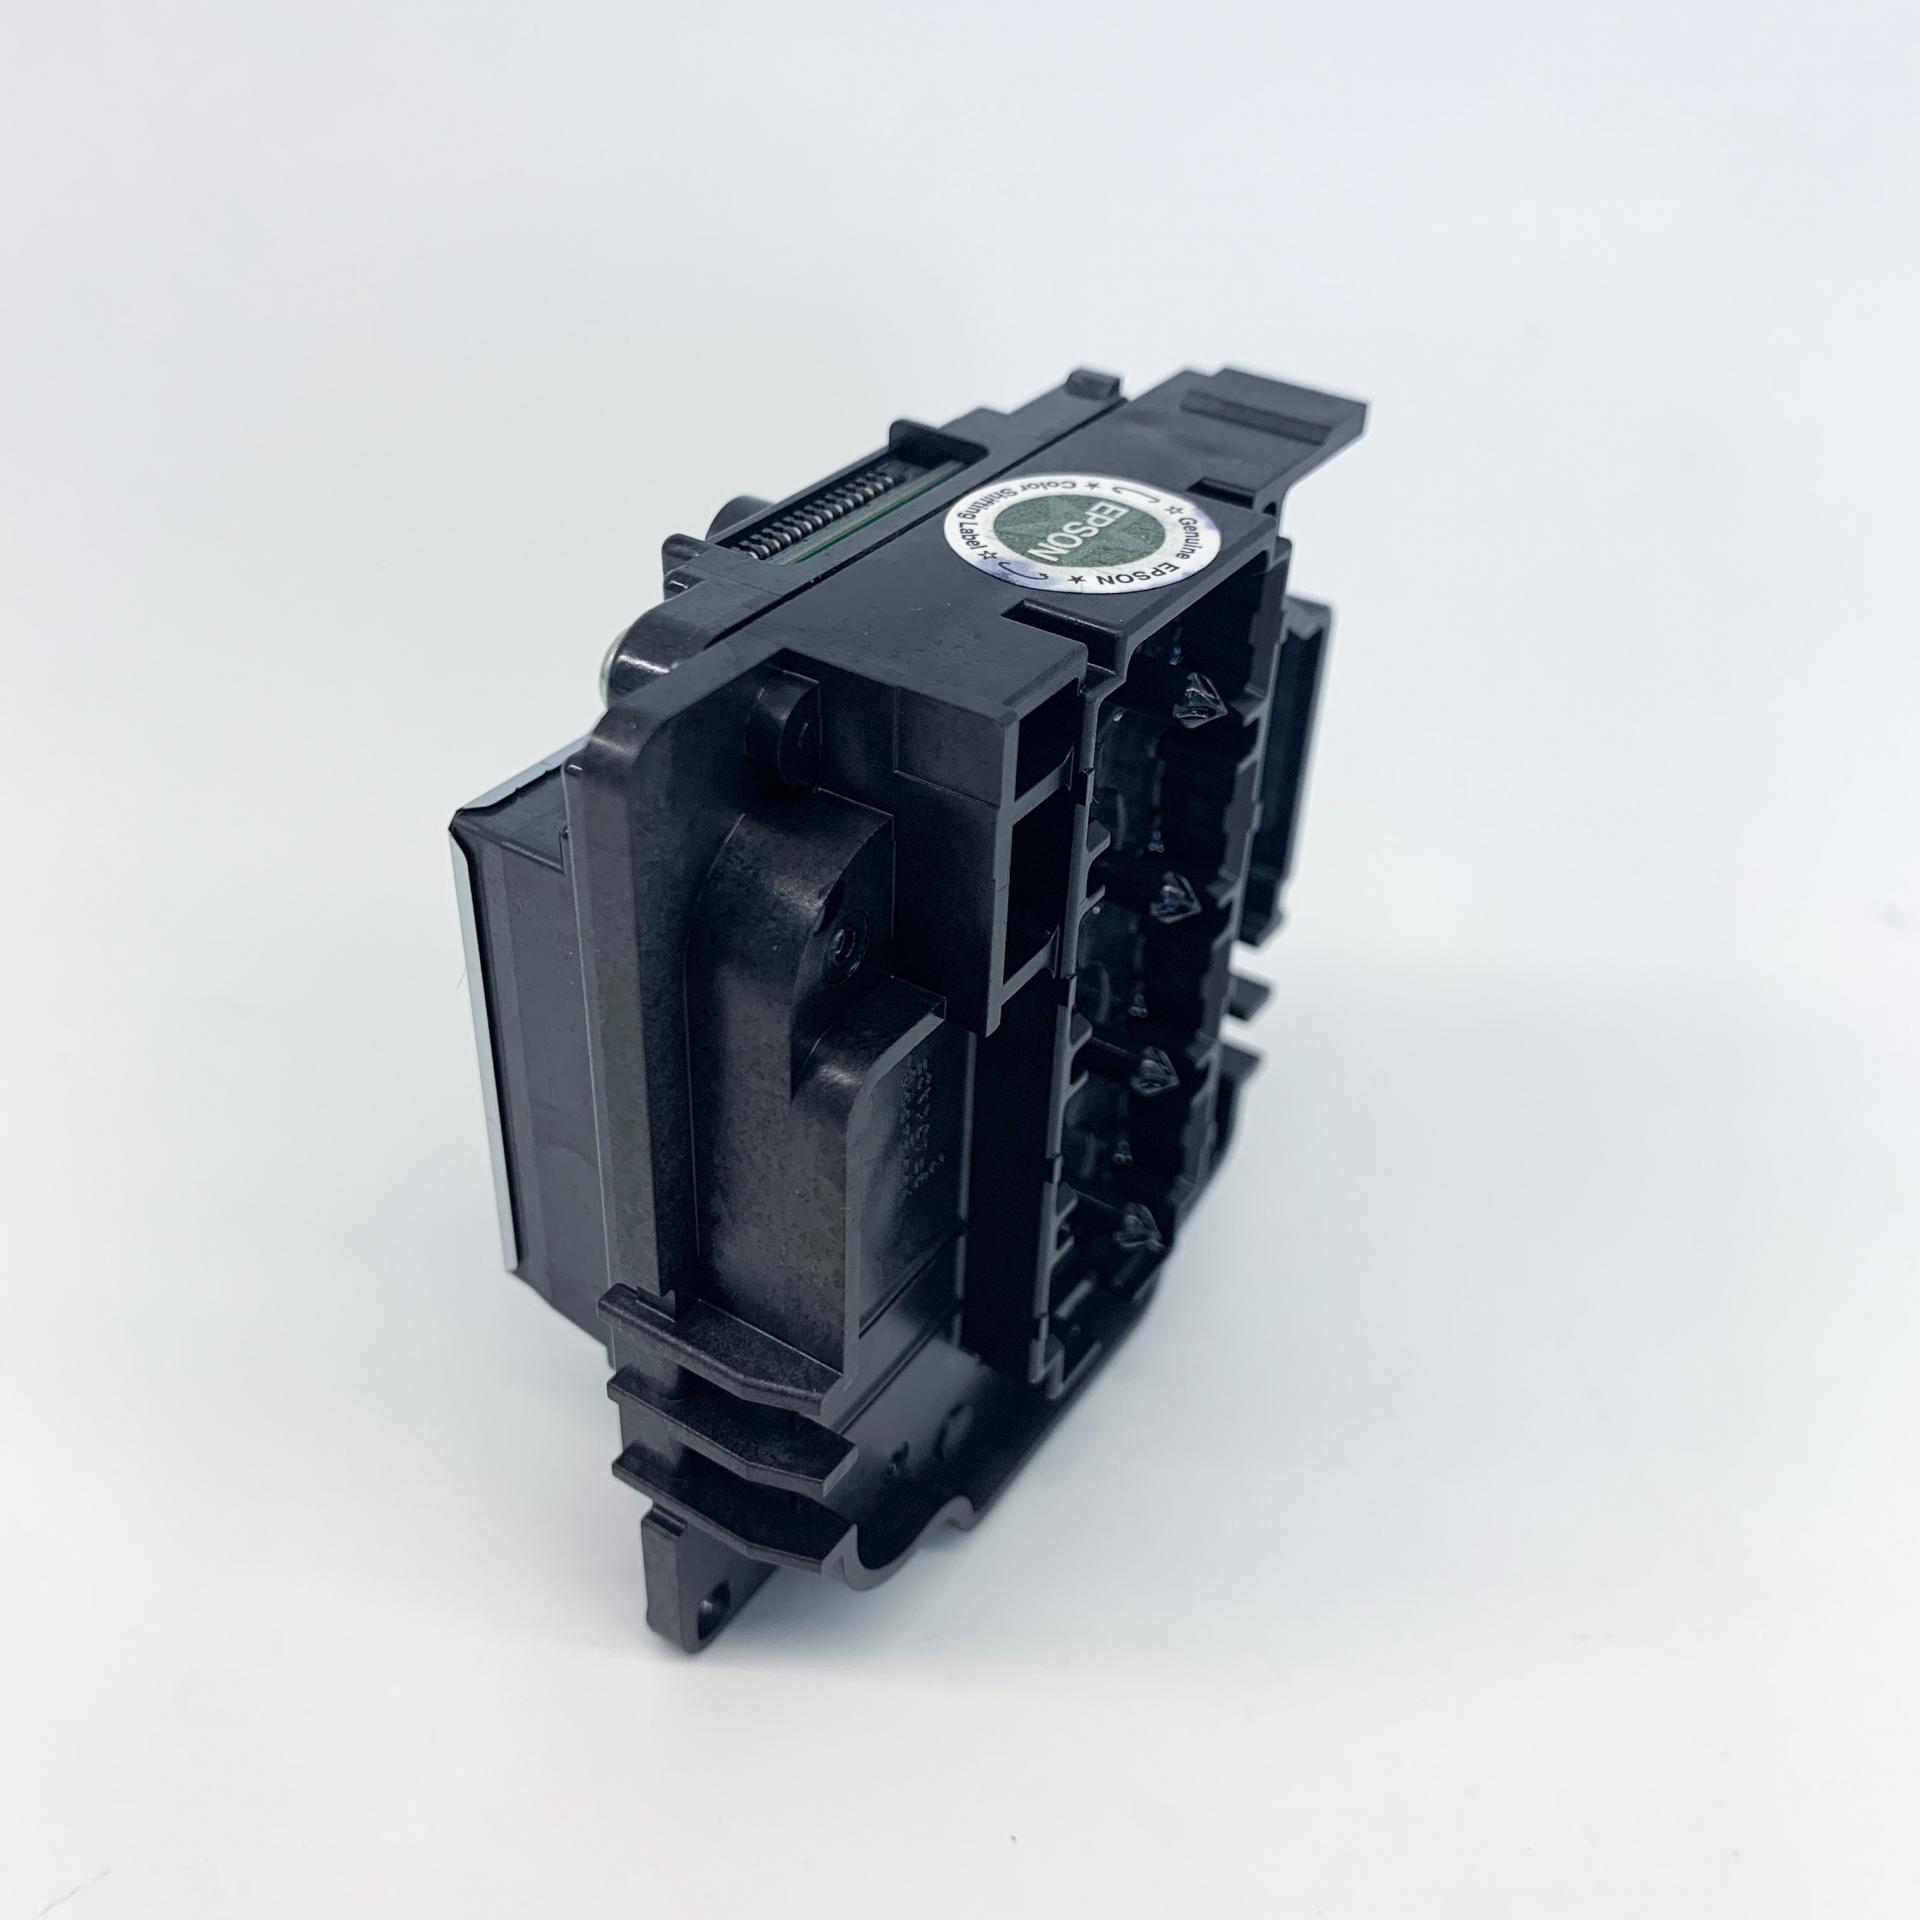 Original Epson water based i3200-A1 print head for Sublimation printer